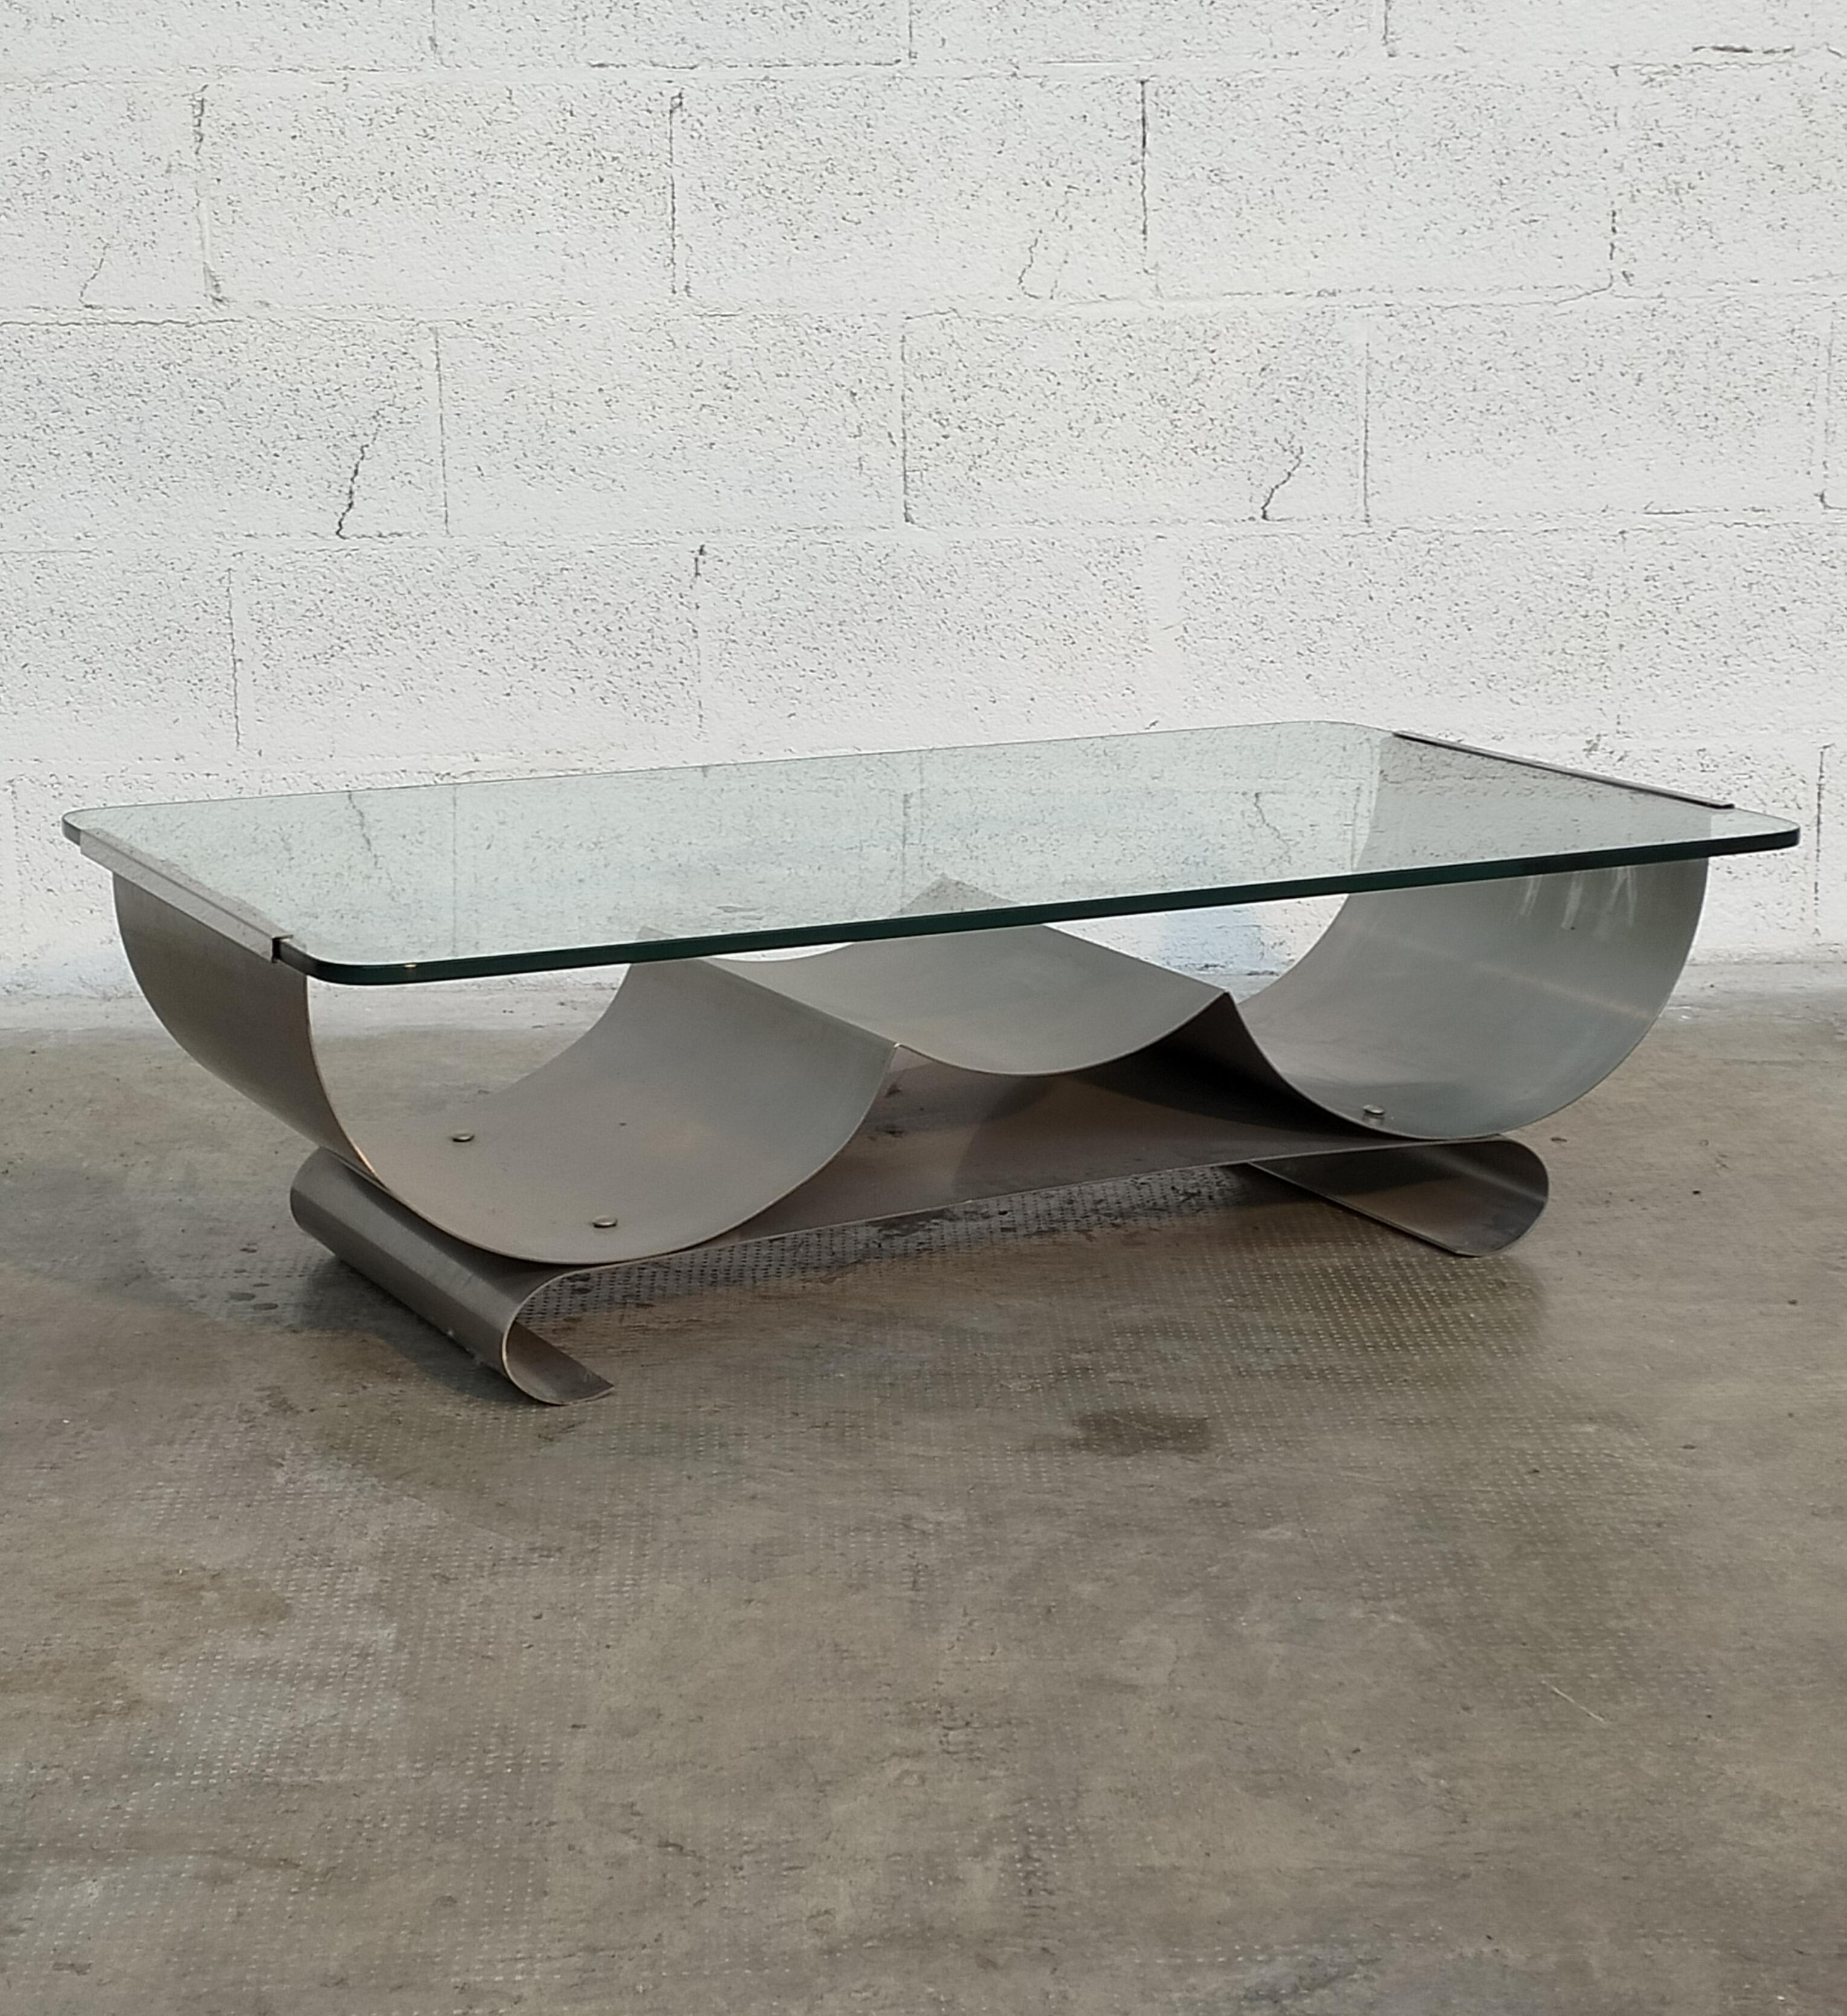 Stainless Steel and Glass Coffee Table by Francois Monnet for Kappa 70s For Sale 5